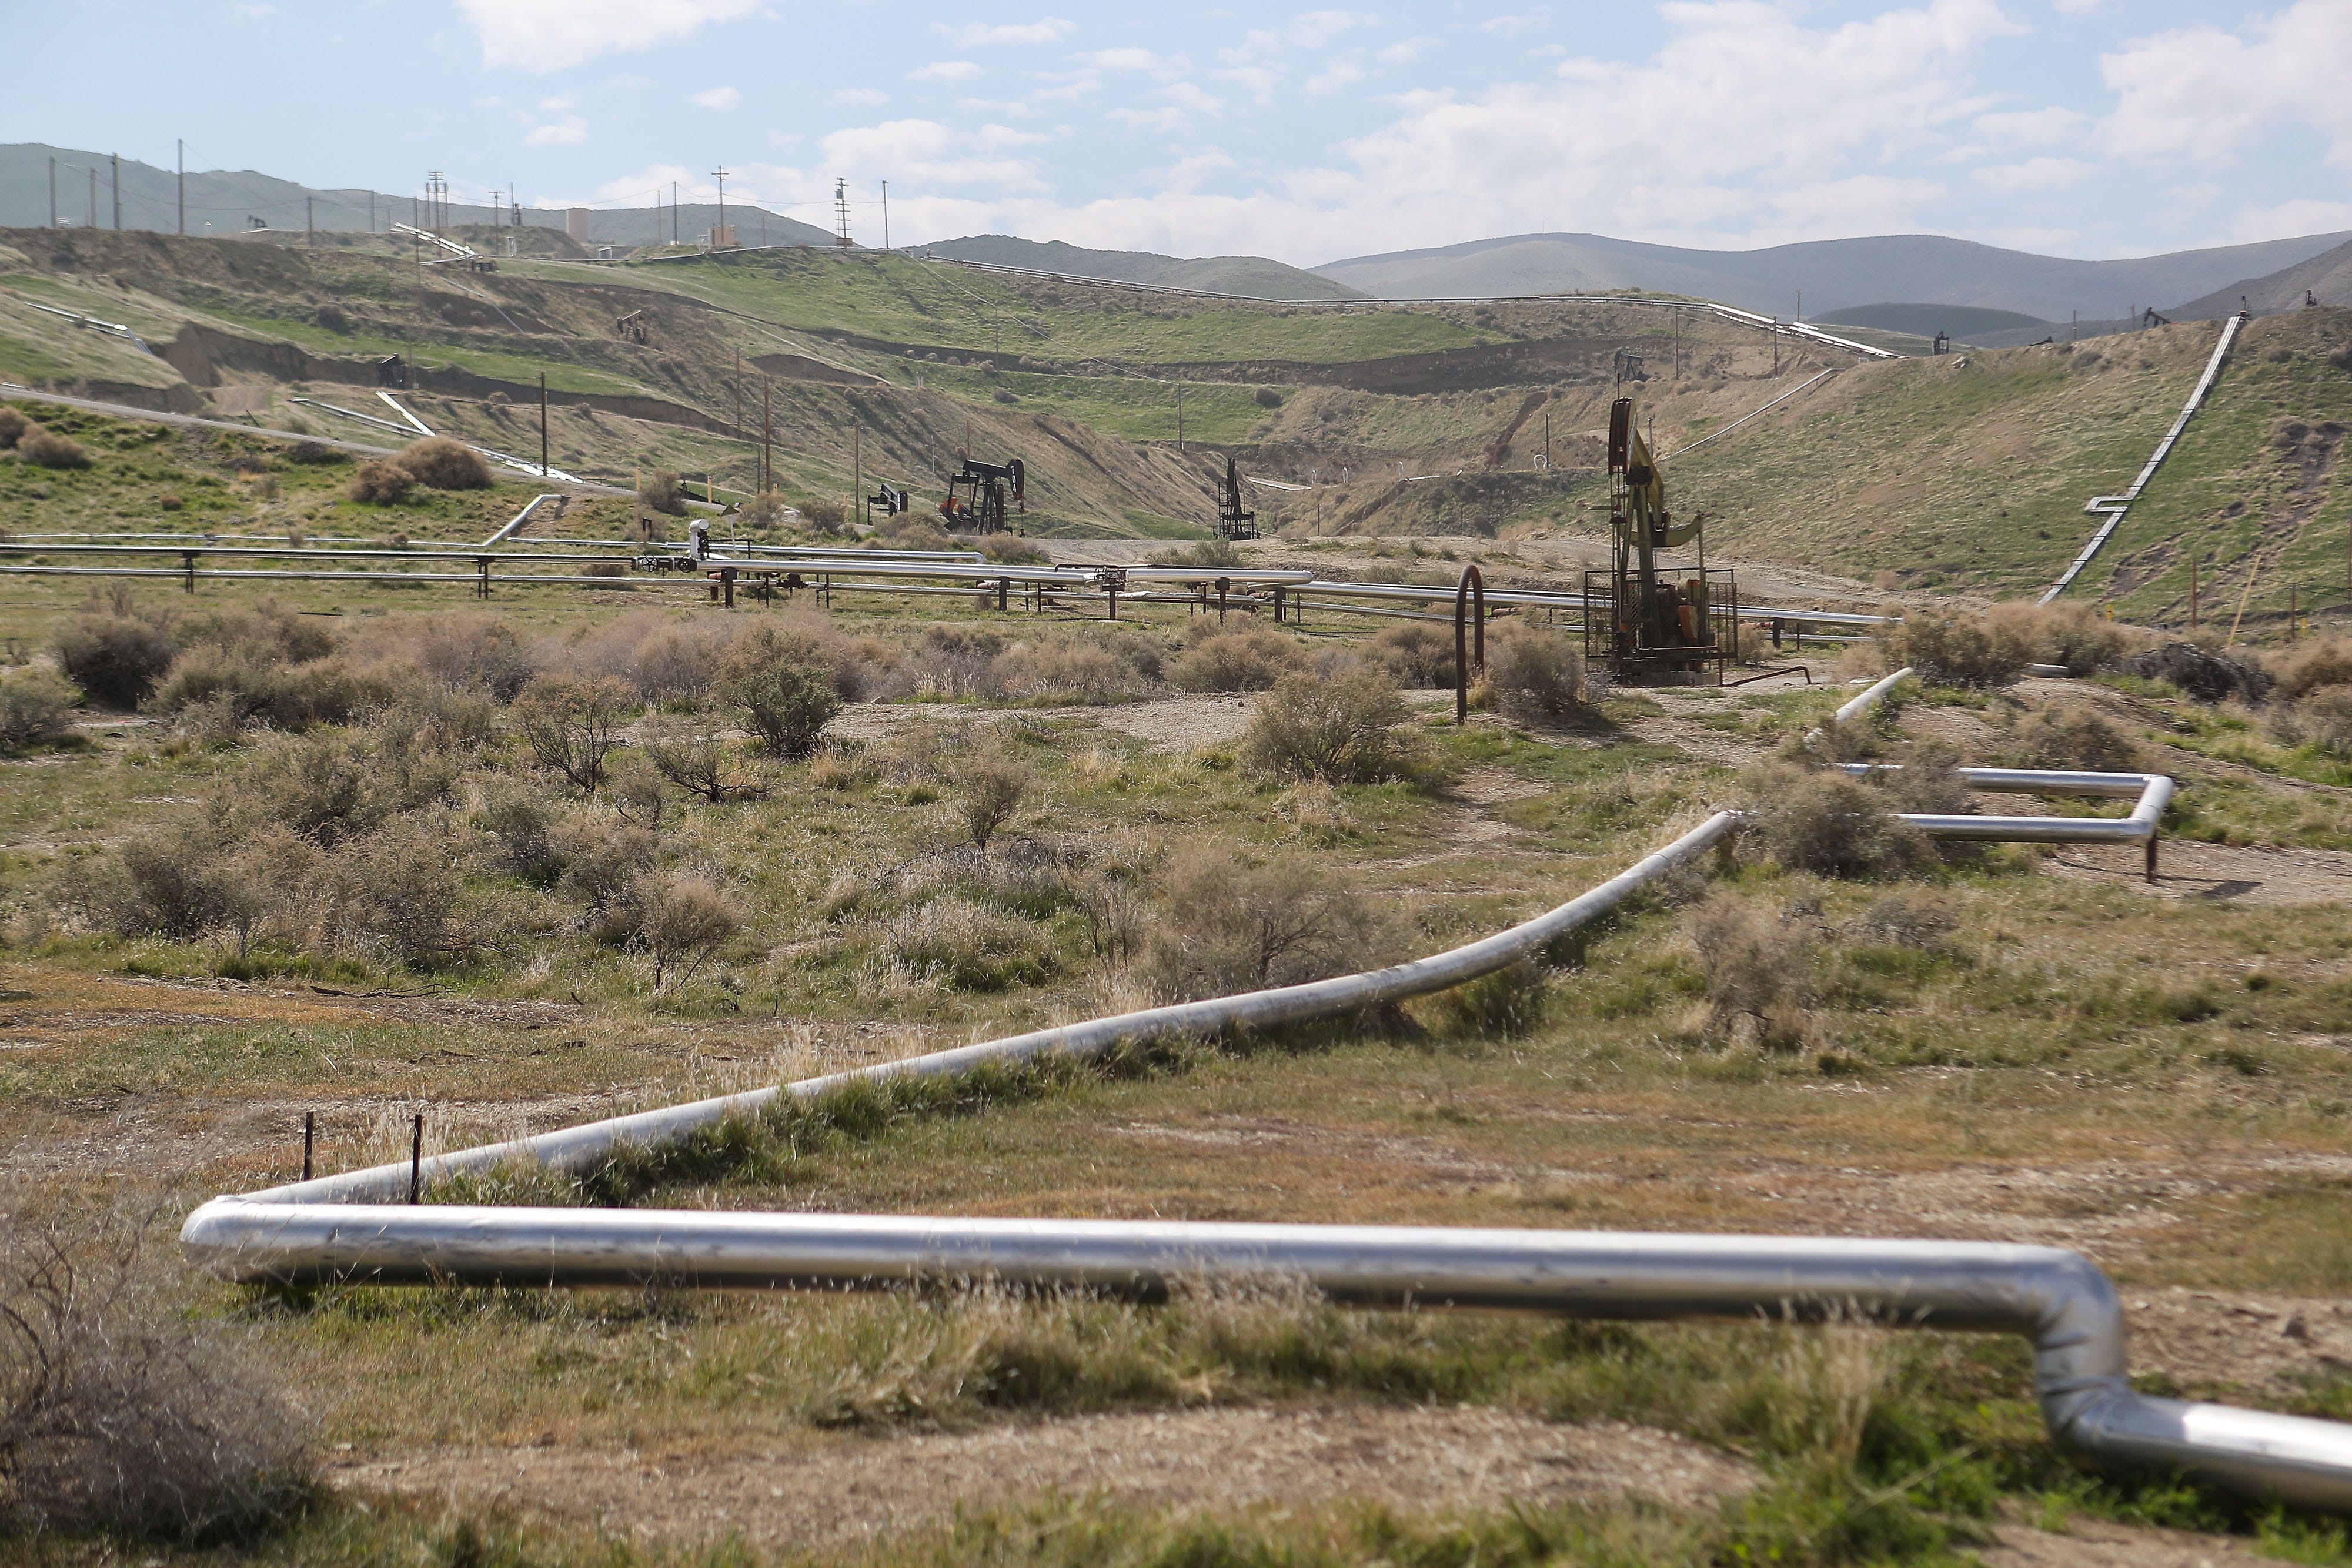 Oil and steam pipelines crisscross the oil fields in Kern County, California.